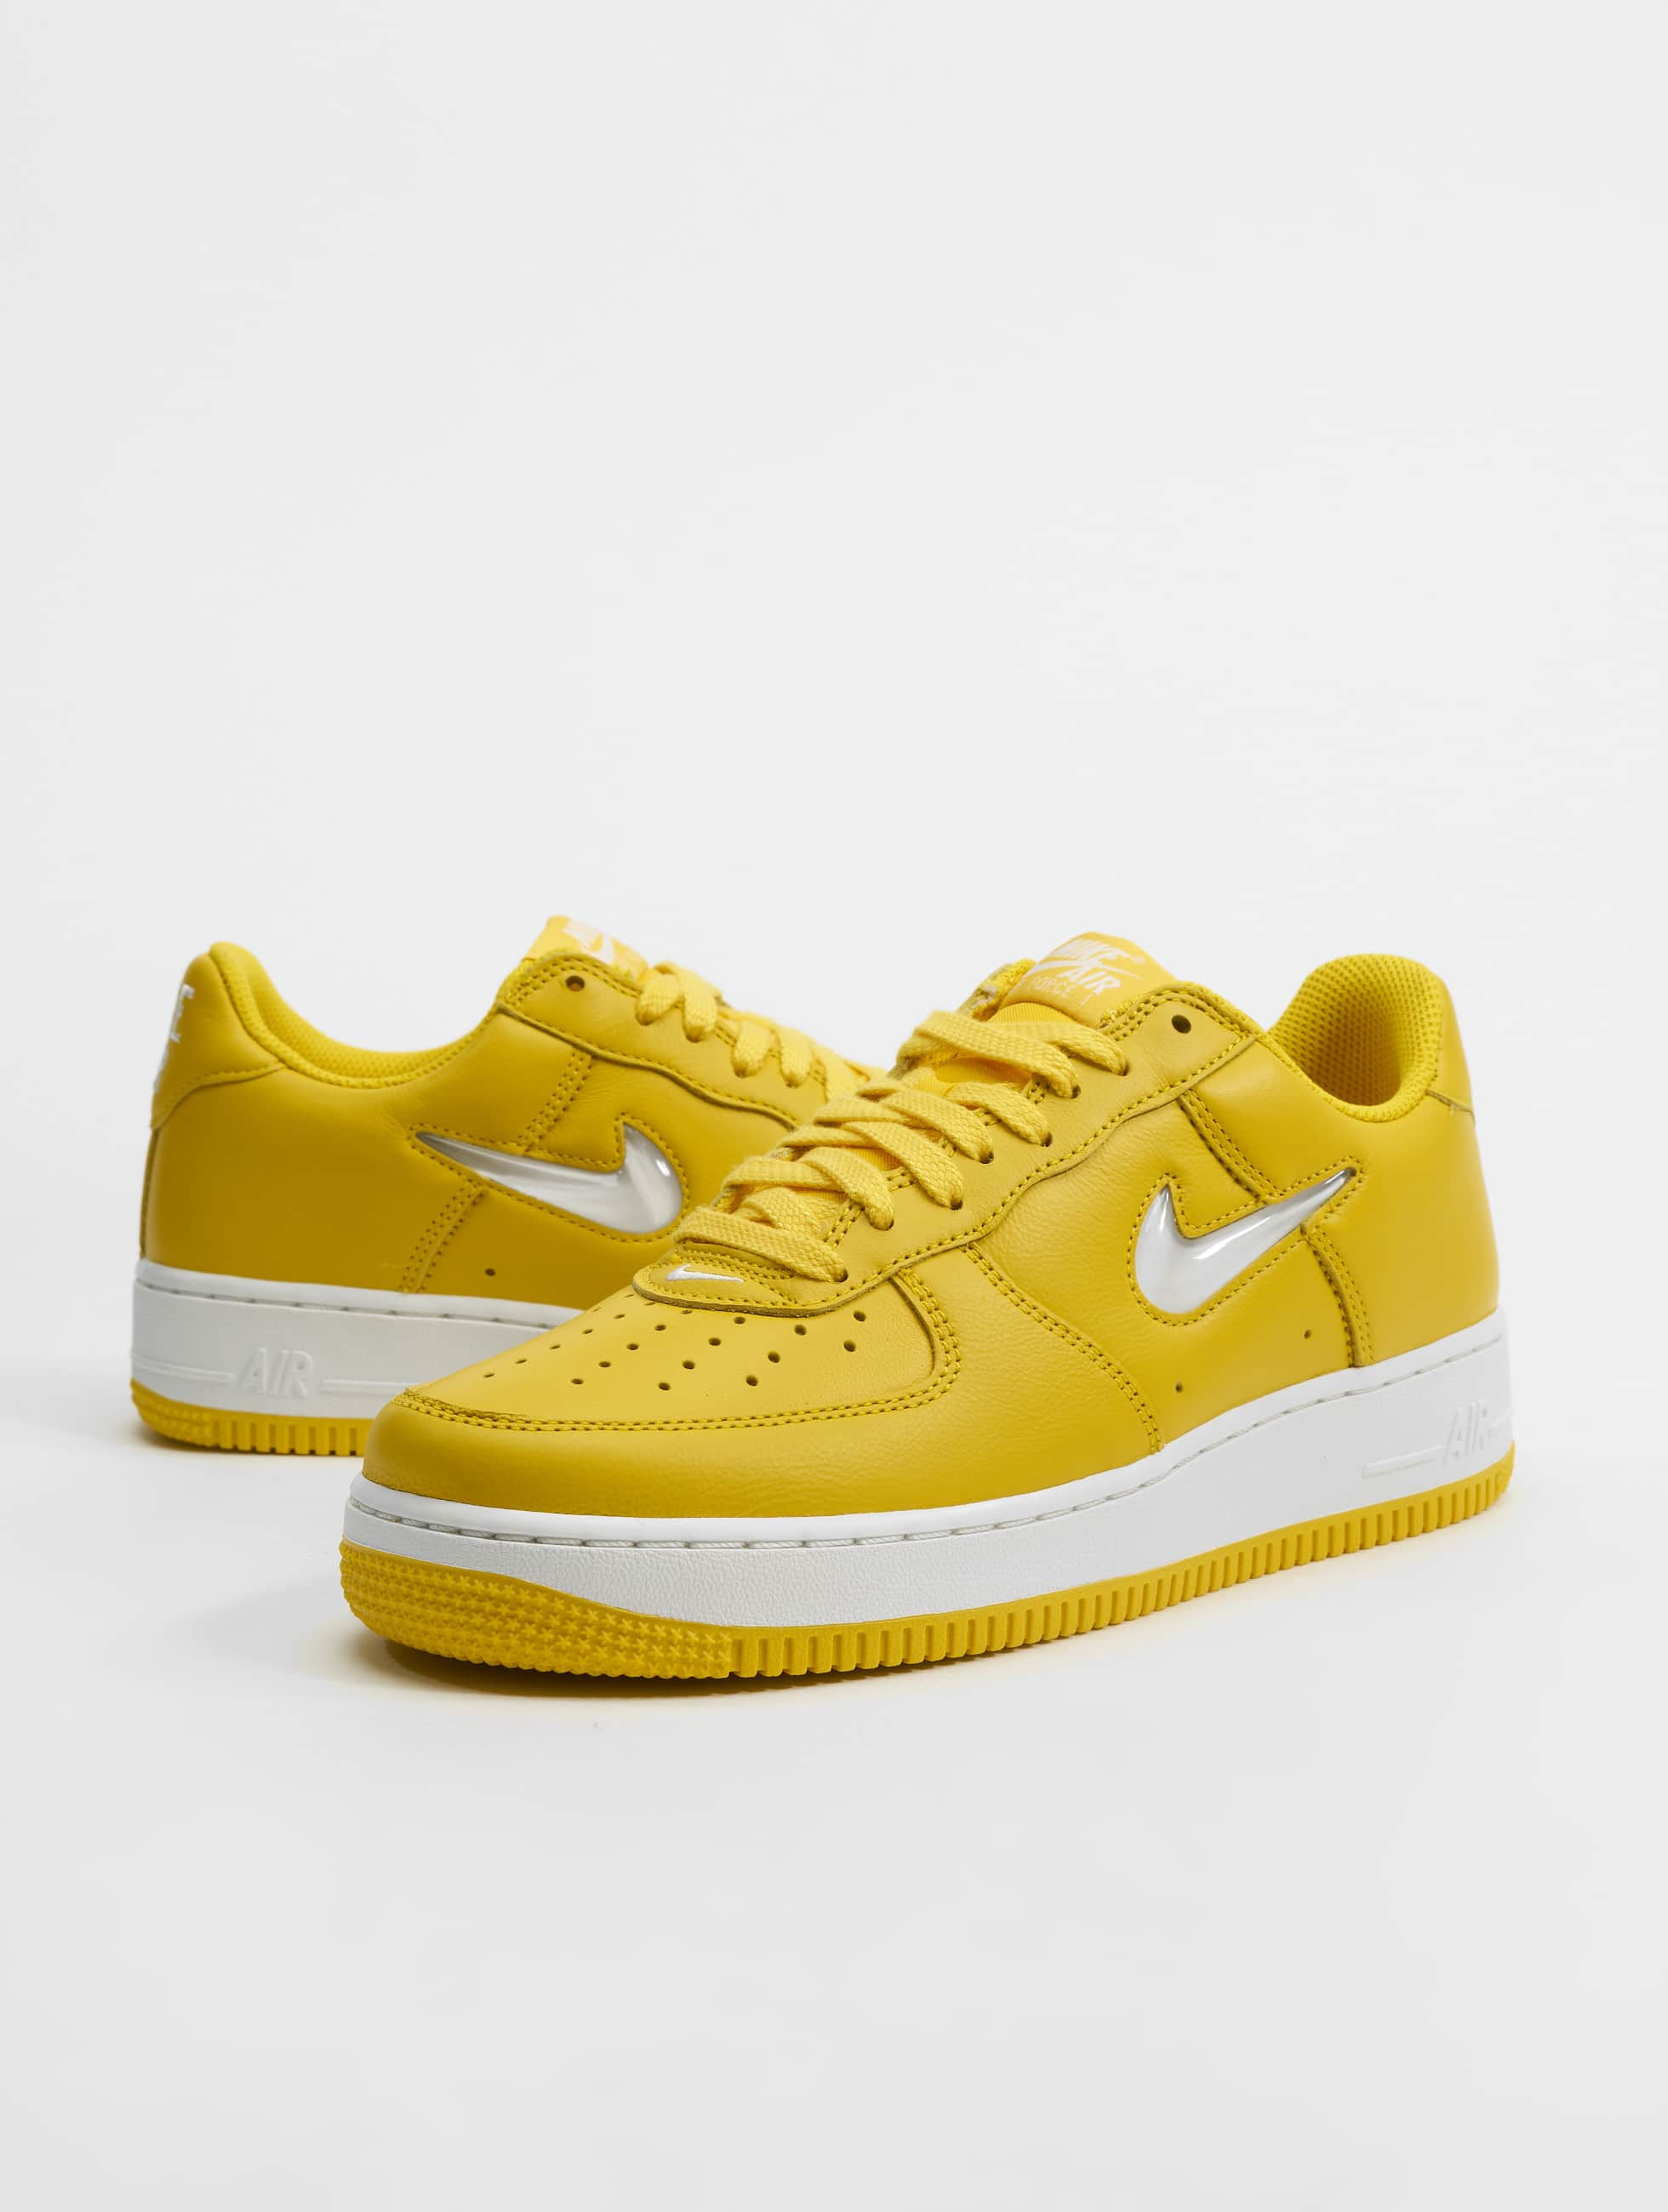 Inleg plank Moskee Nike schoen / sneaker Air Force 1 Colour Of The Month in geel 1042251